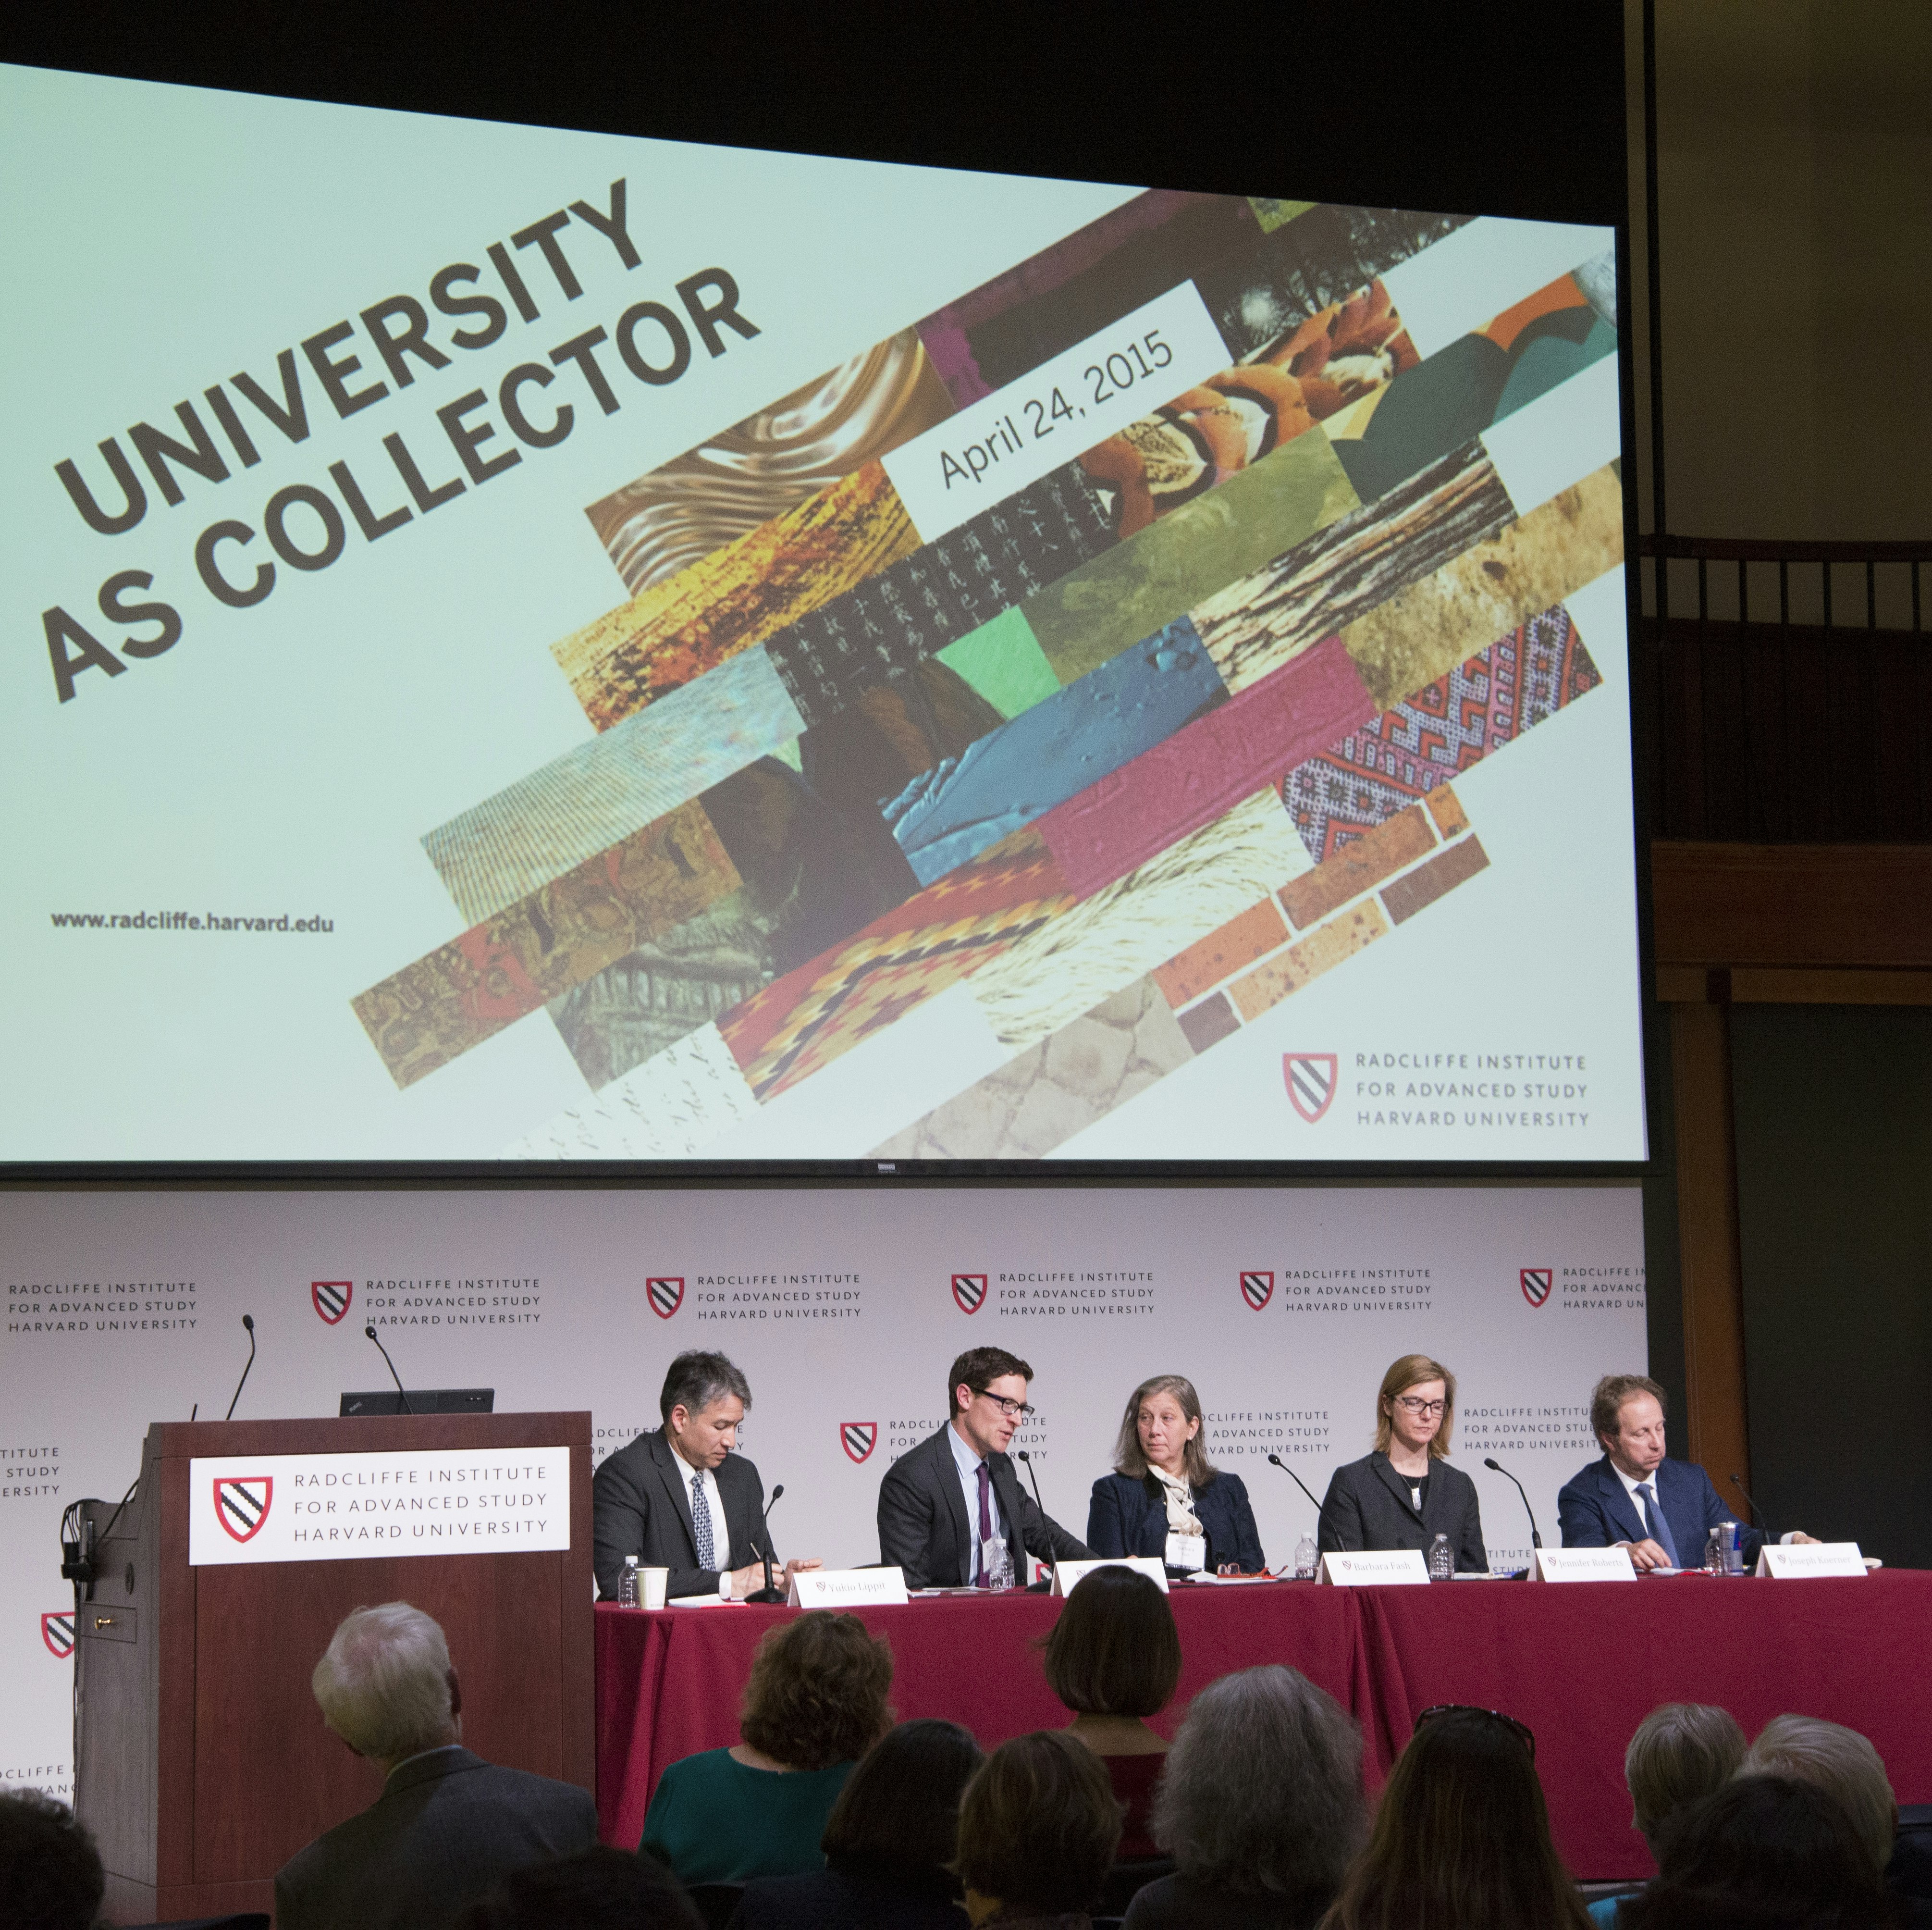 Panel at "University As Collector" featuring conference Powerpoint.